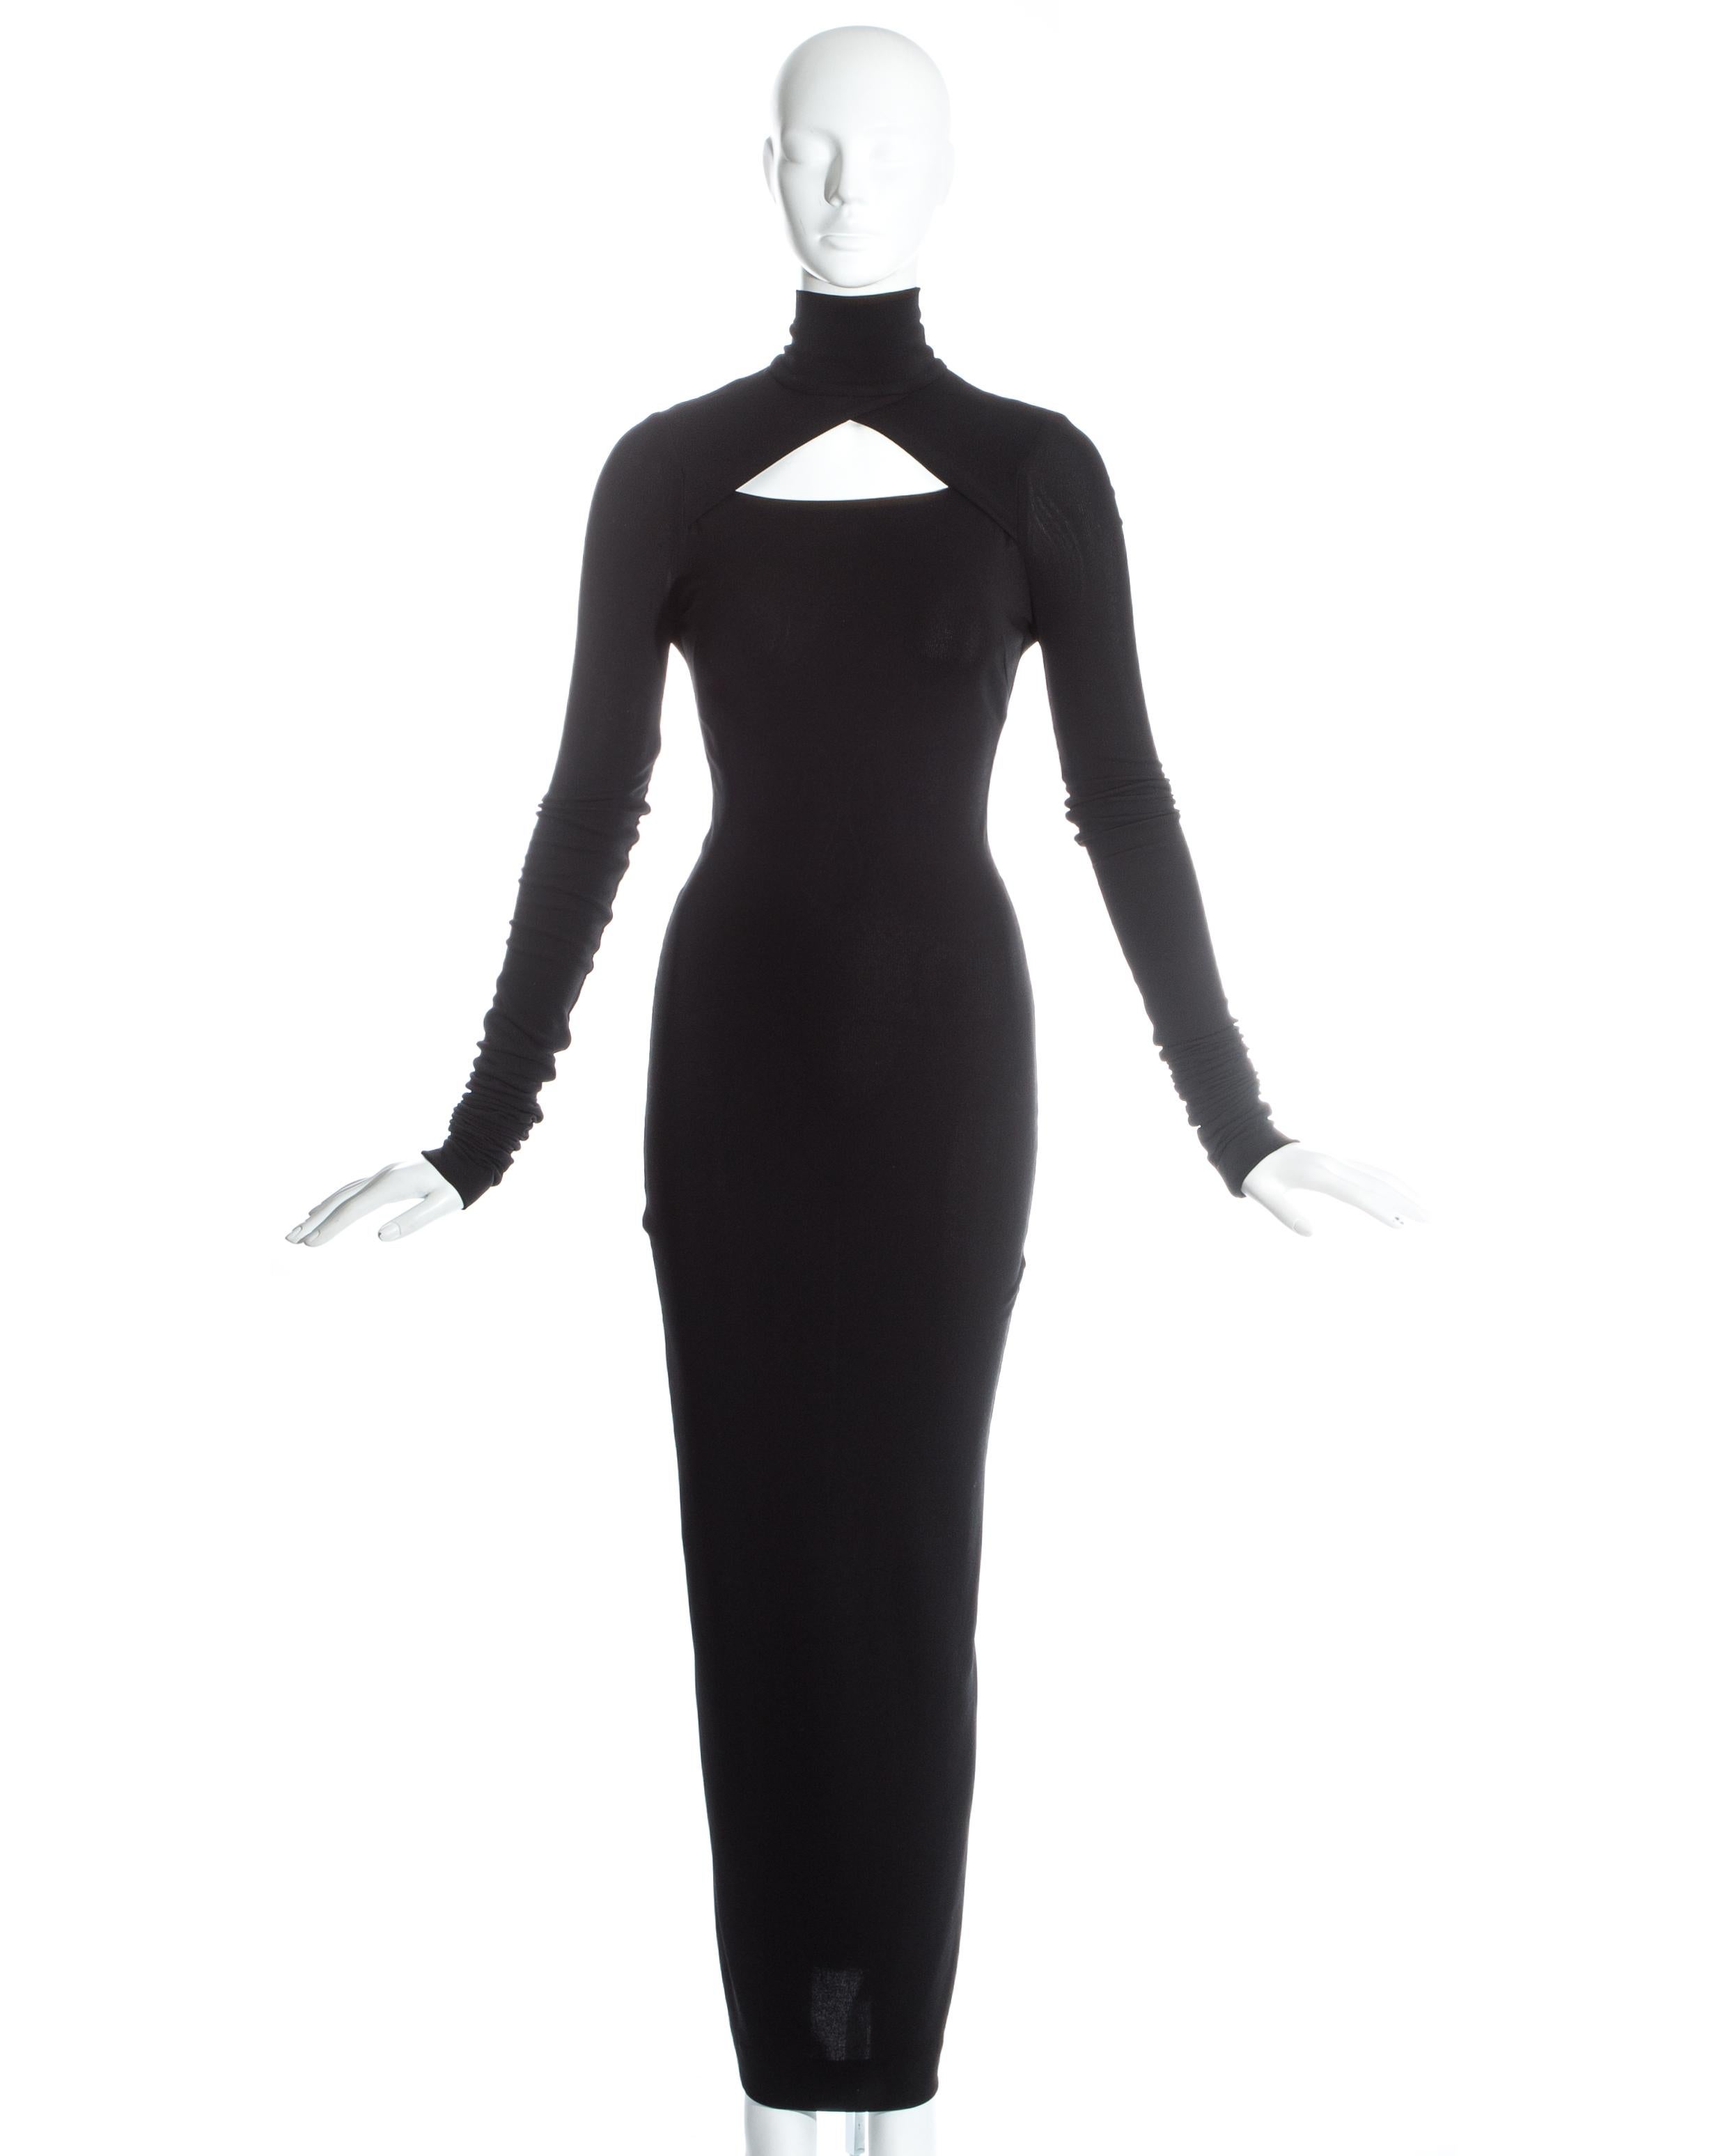 Dolce & Gabbana black spandex figure hugging maxi dress with cut out, turtle neck, zip fastening, and pleating down the centre back. 

c. 1990s